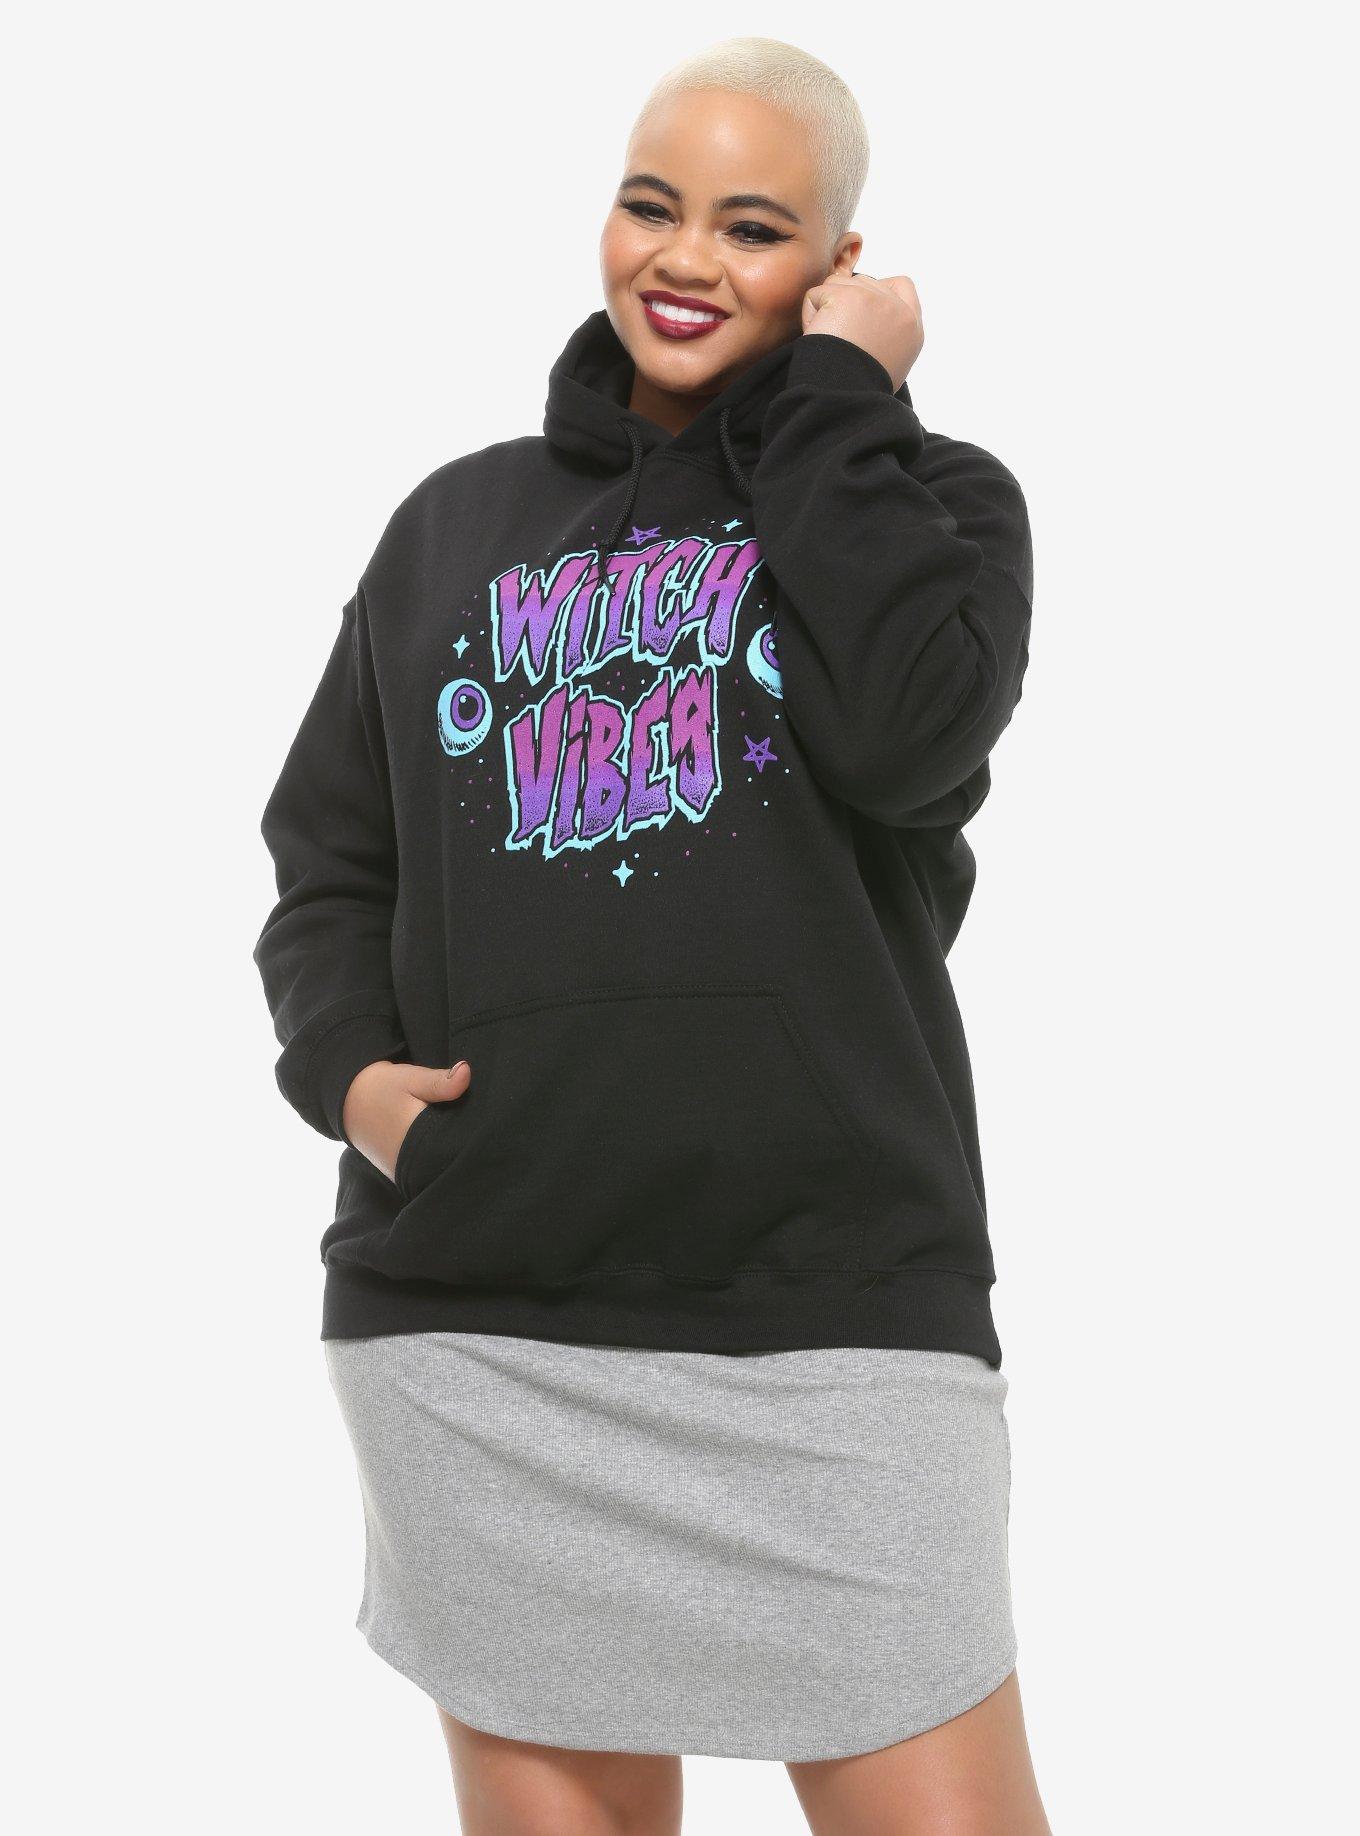 Witch Vibes Girls Hoodie Plus Size, MULTI, hi-res